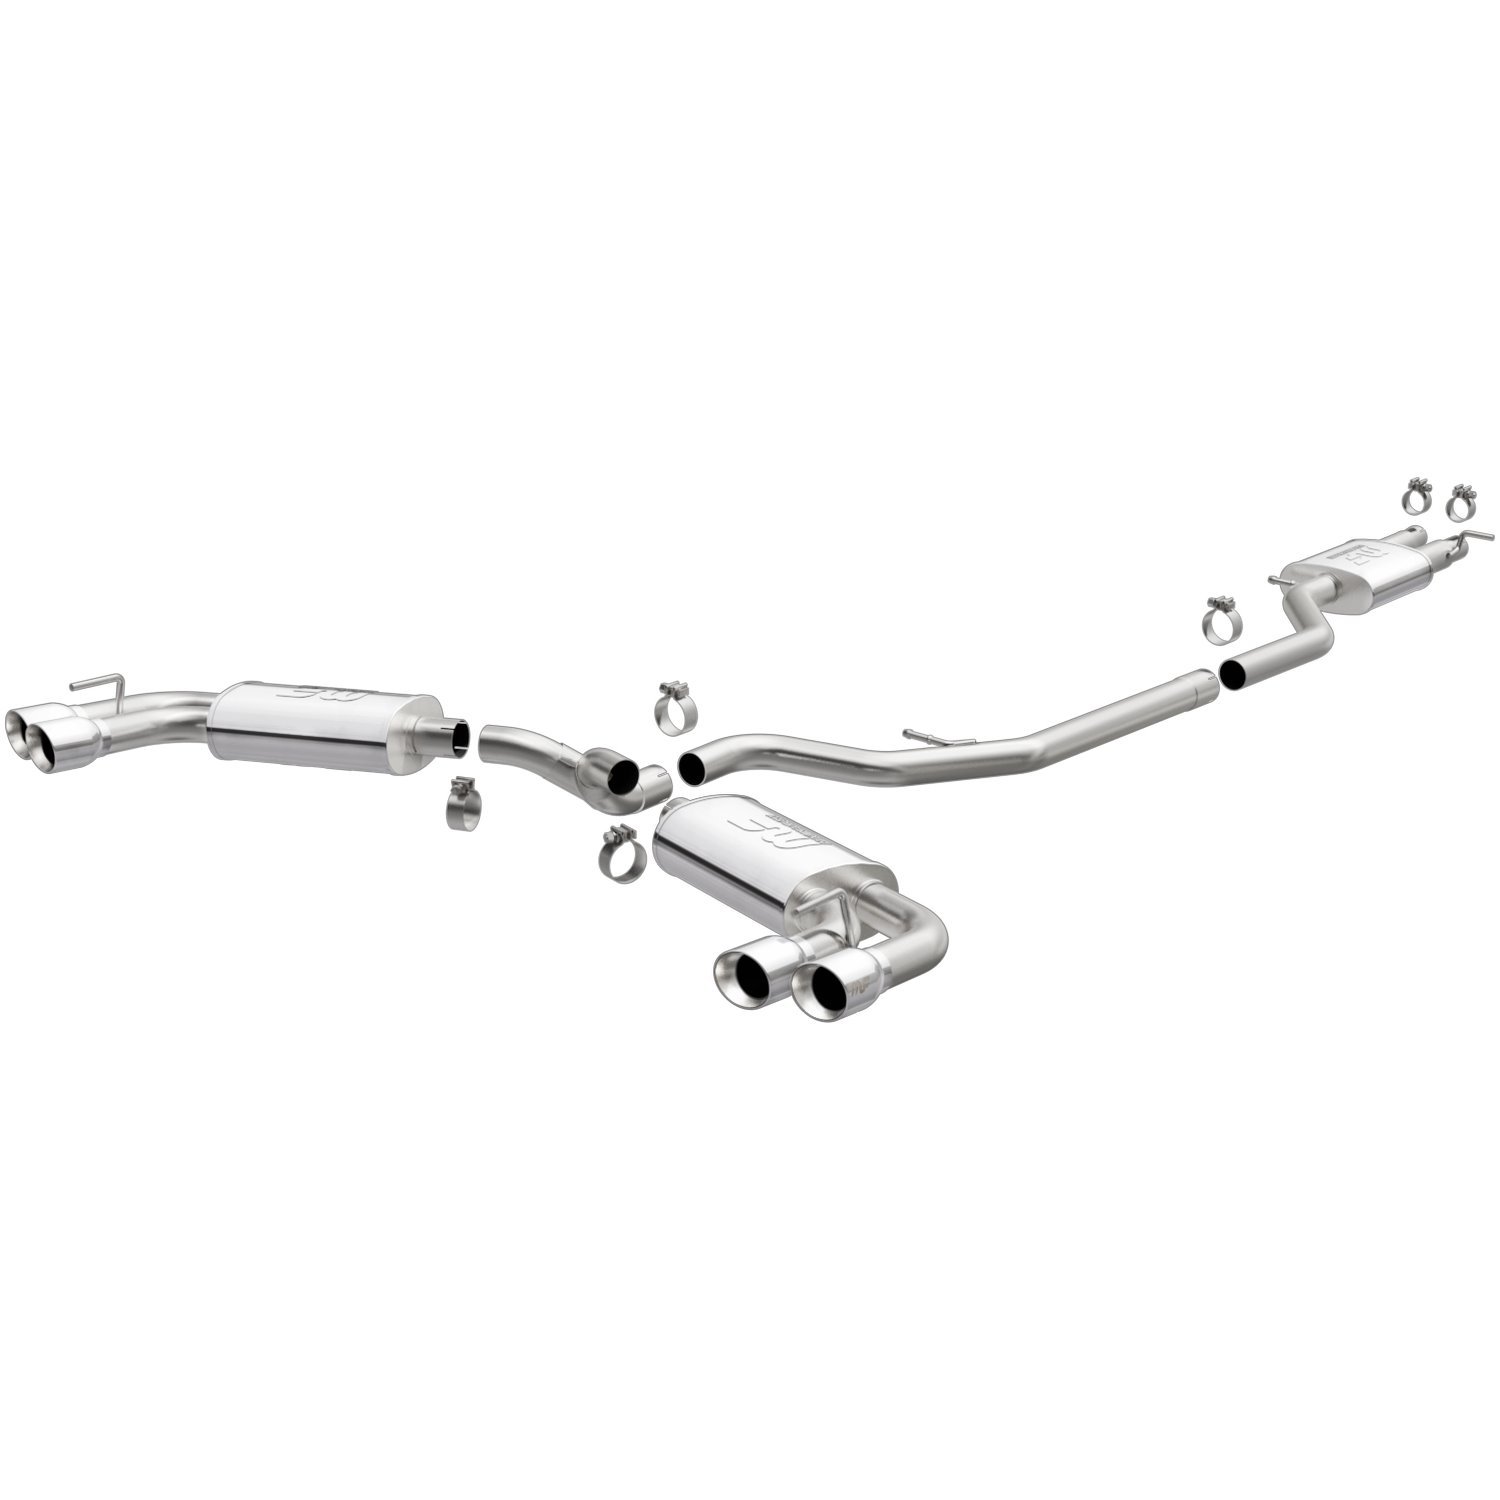 Street Series Cat-Back Exhaust System Fits Select Chevy